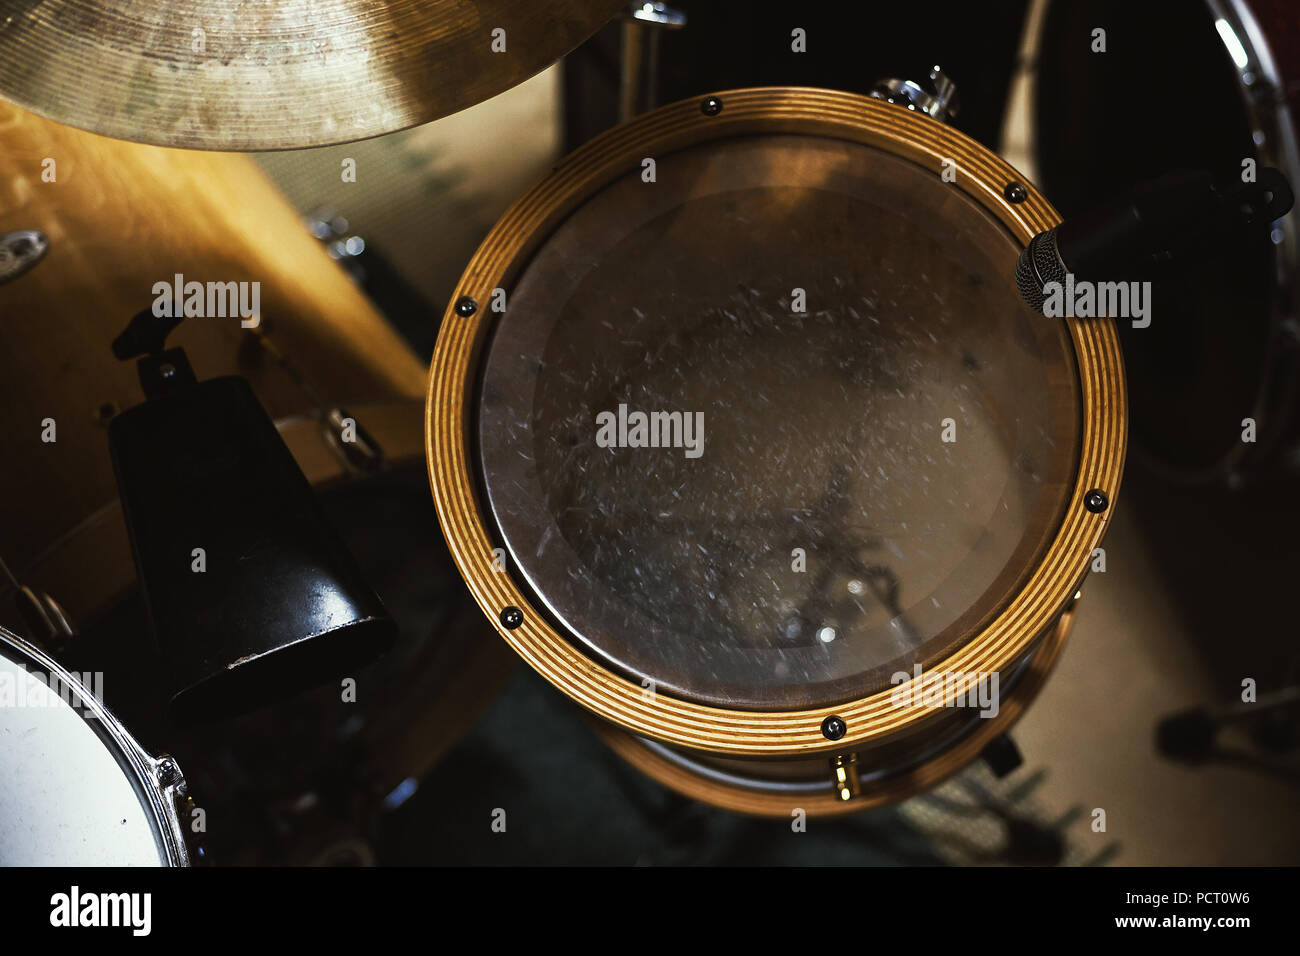 Part of a drum kit, details of toms and snare. Stock Photo